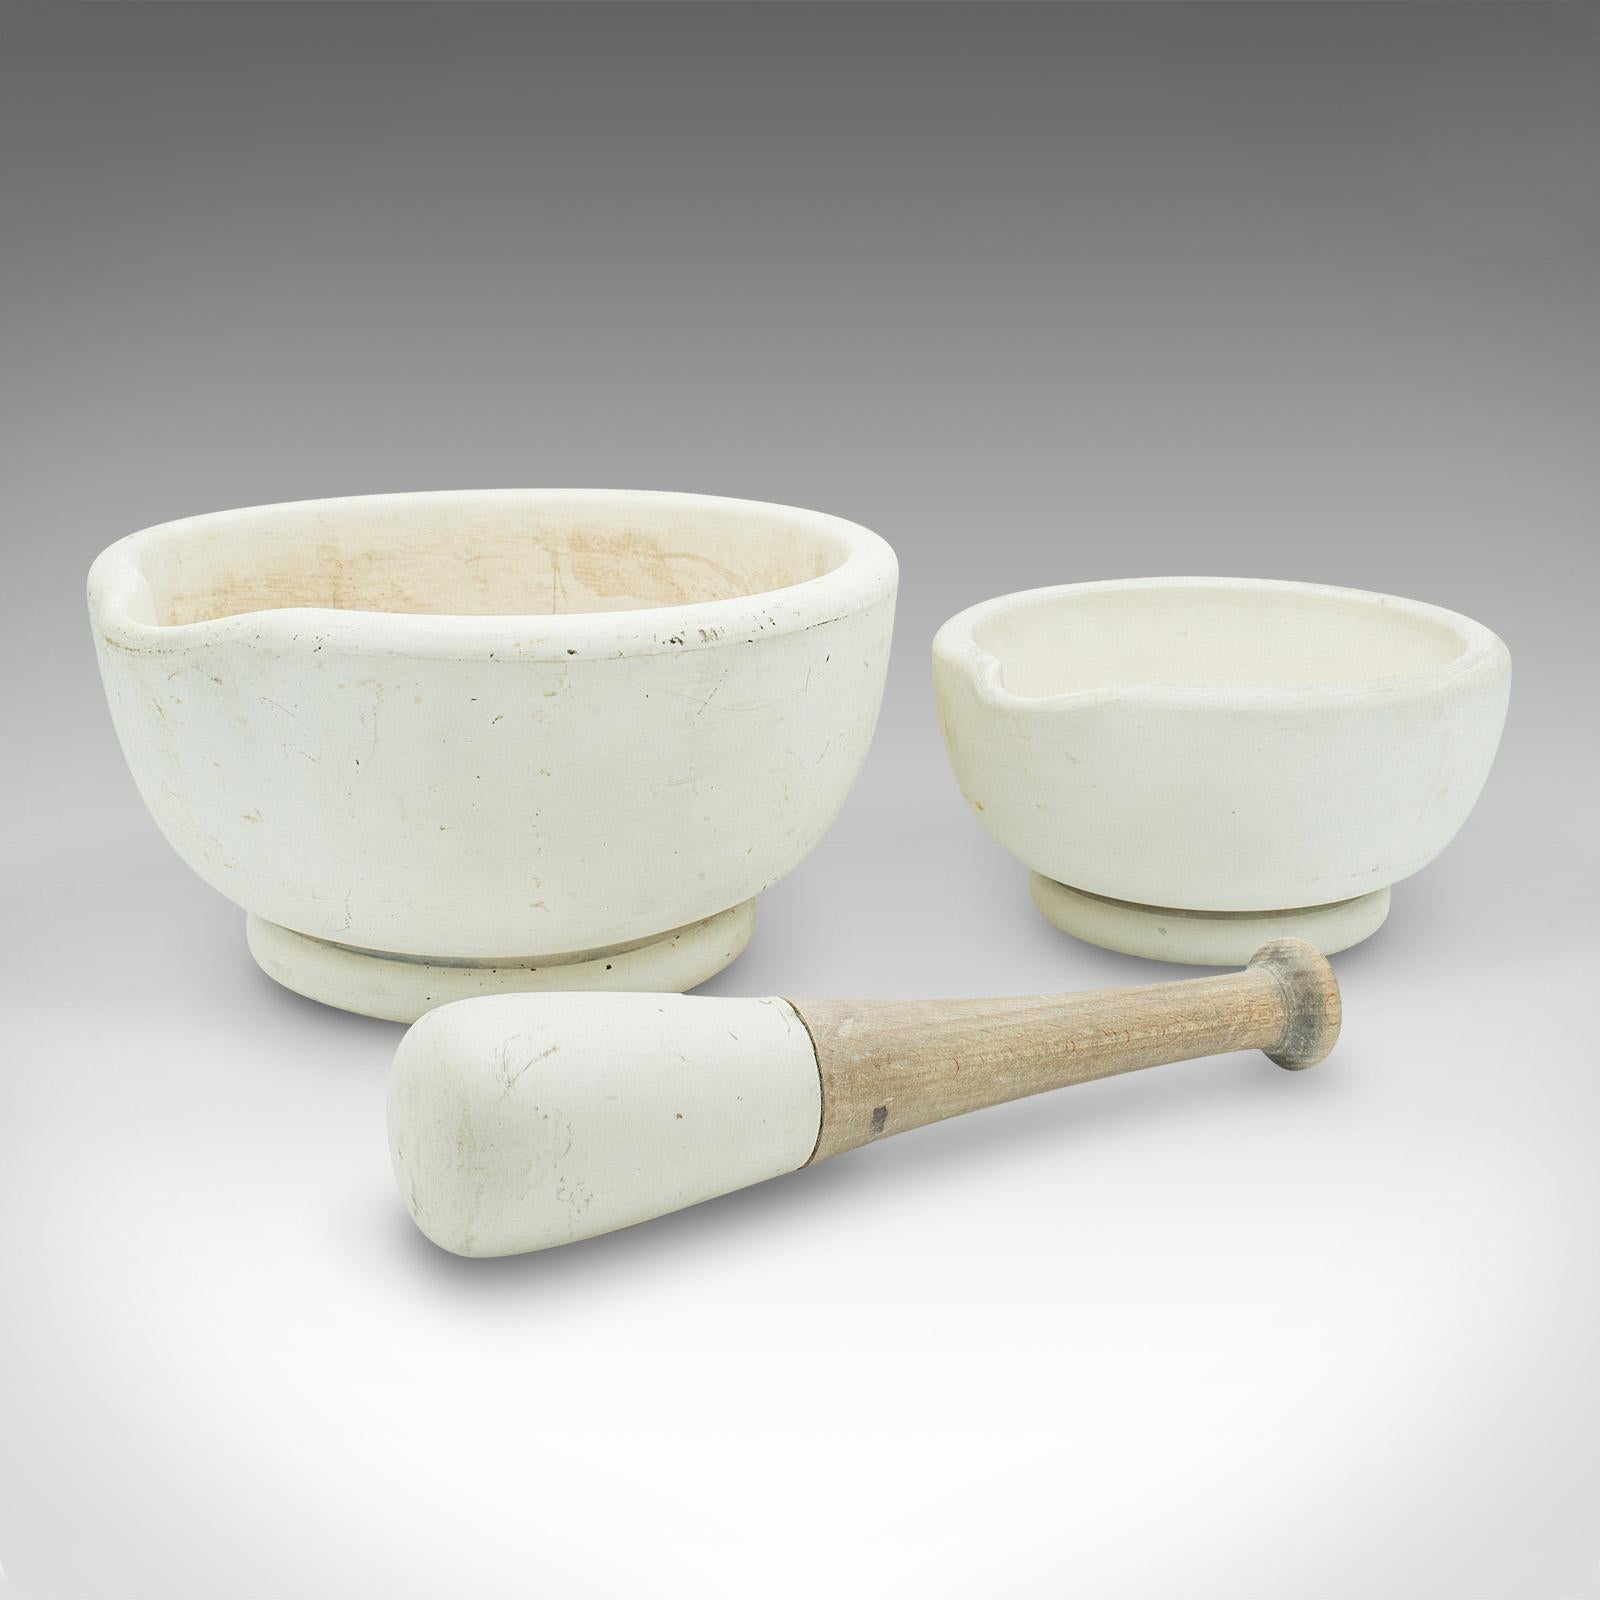 This is an antique mortar and pestle duo. An English, ceramic and beech apothecary or cookery aid, dating to the late Victorian period, circa 1900.

Of great proportion, across two generous mortar bowls
Displaying a desirable aged patina with